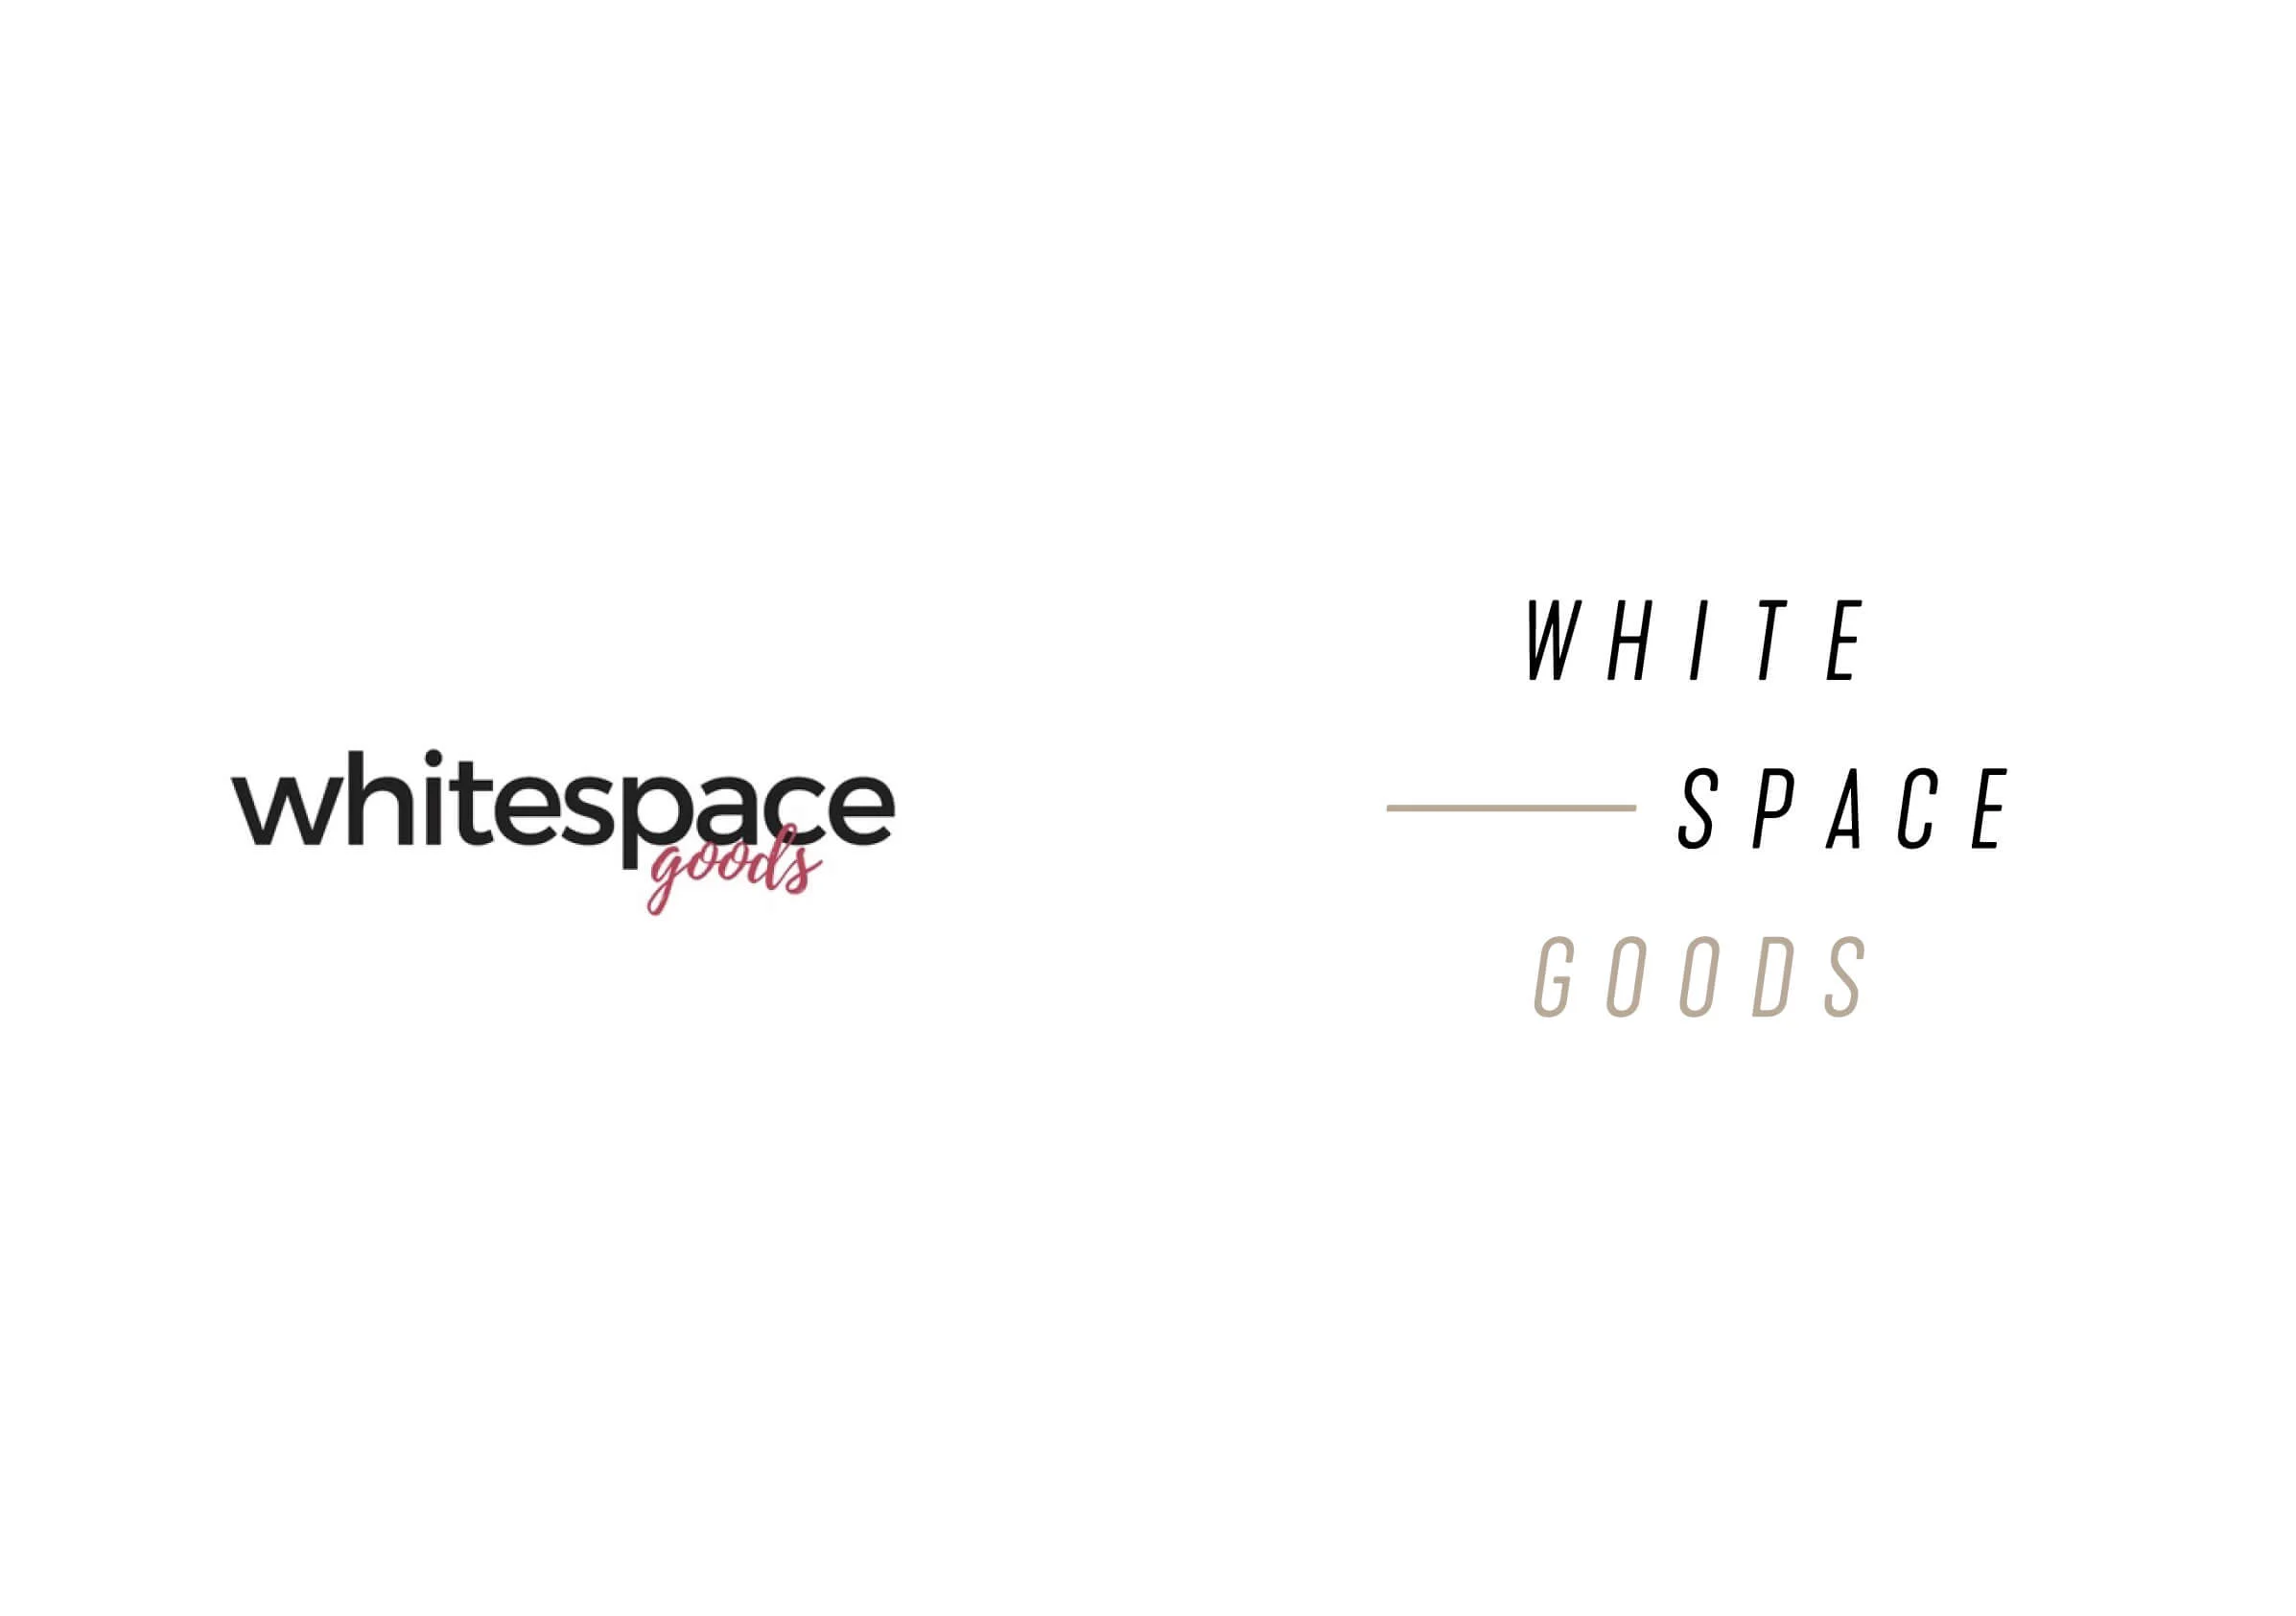 Whitespace Goods before and after logo Ottawa-based handmade knitware and decor by graphic designer idApostle